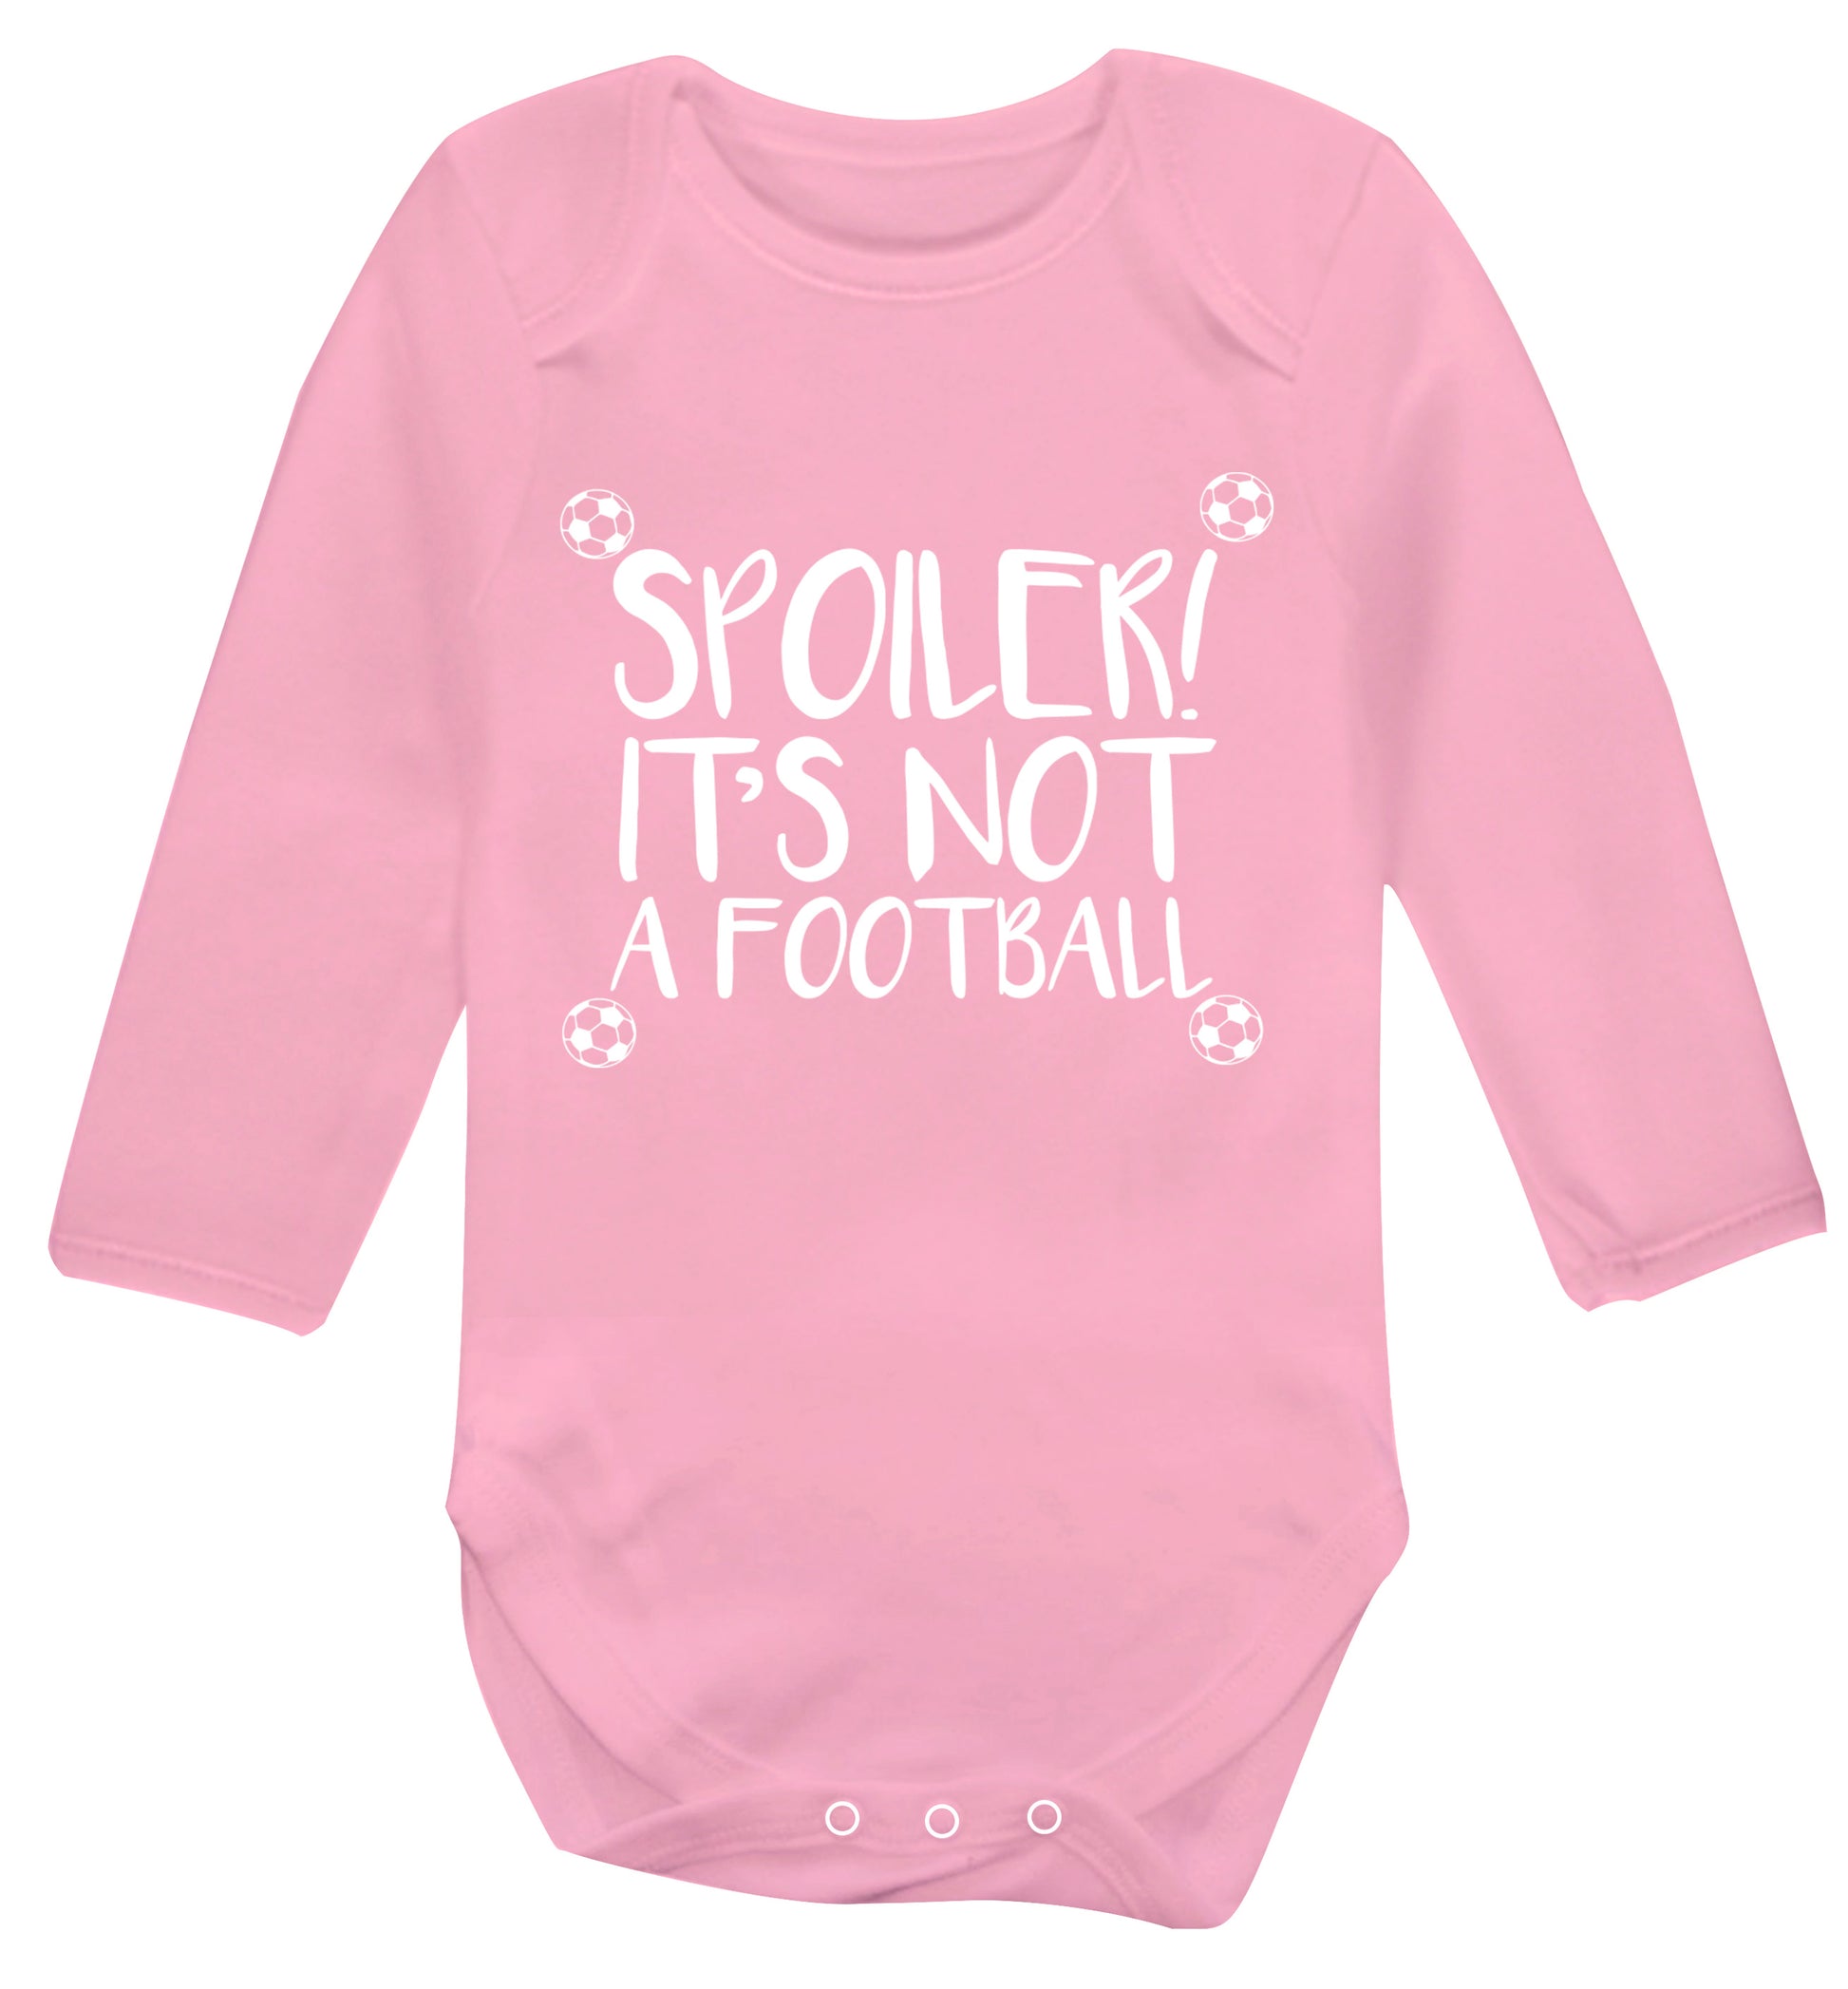 Spoiler it's not a football Baby Vest long sleeved pale pink 6-12 months